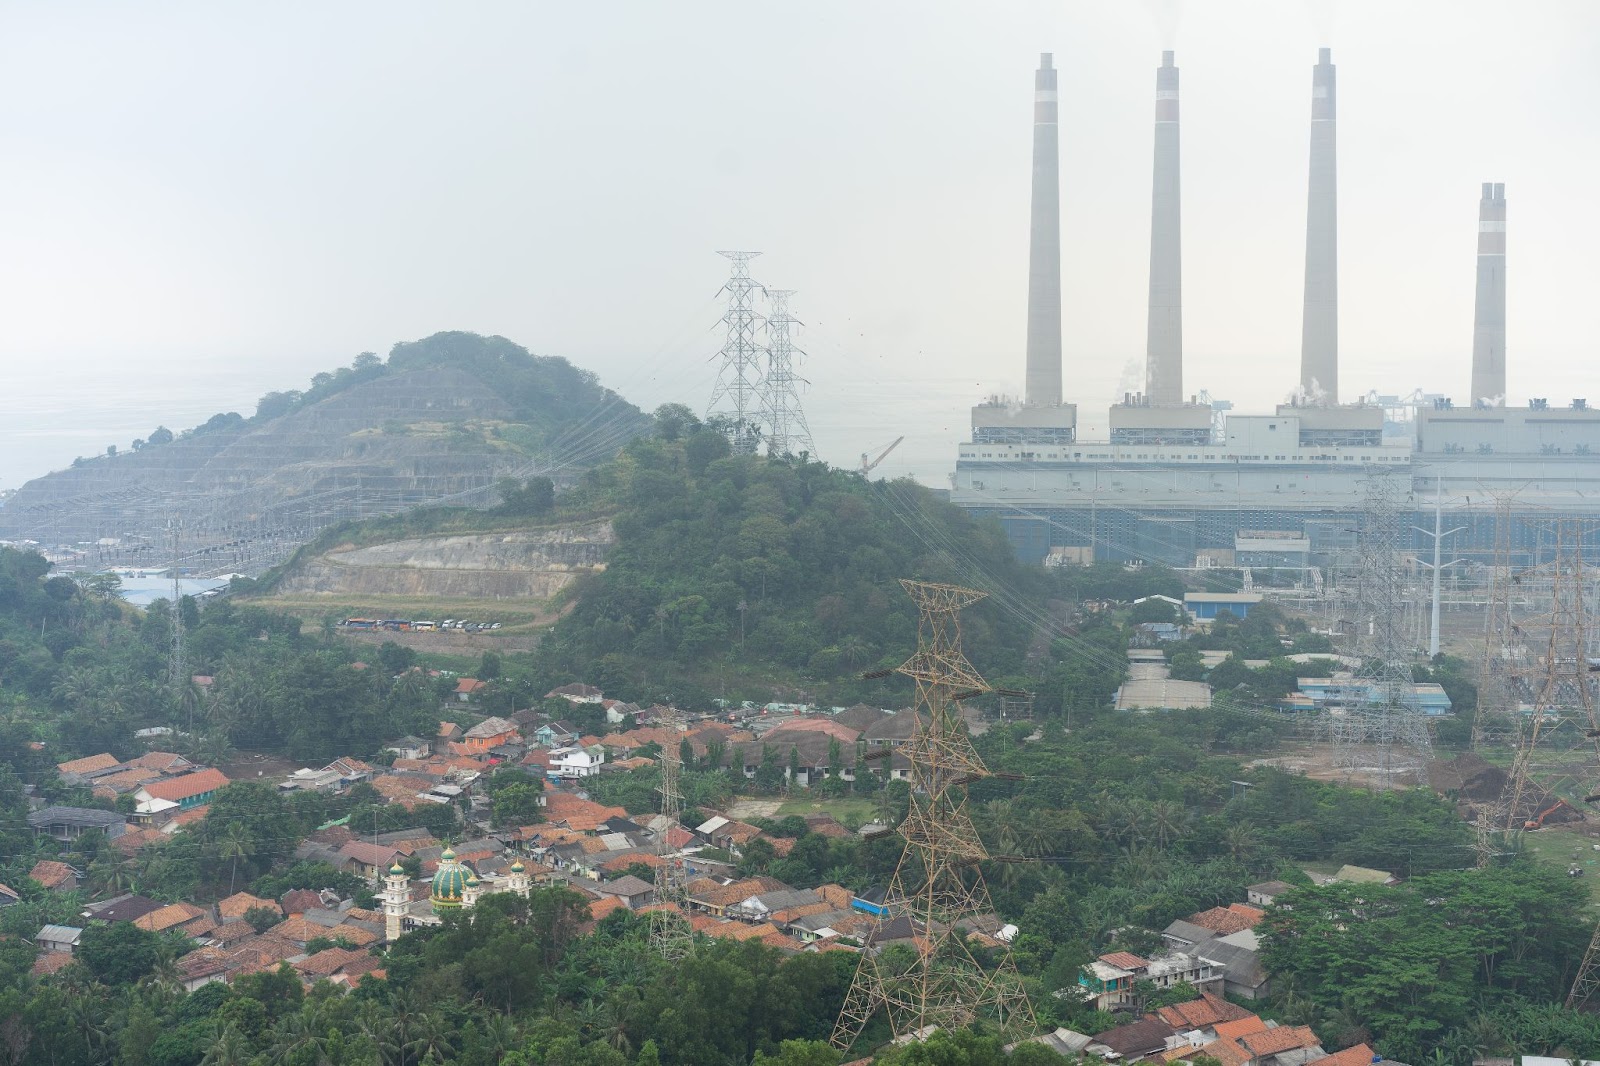 The Suralaya Power Station is the Dirtiest Industrial Complex in Southeast Asia, Source: Inclusive Development International